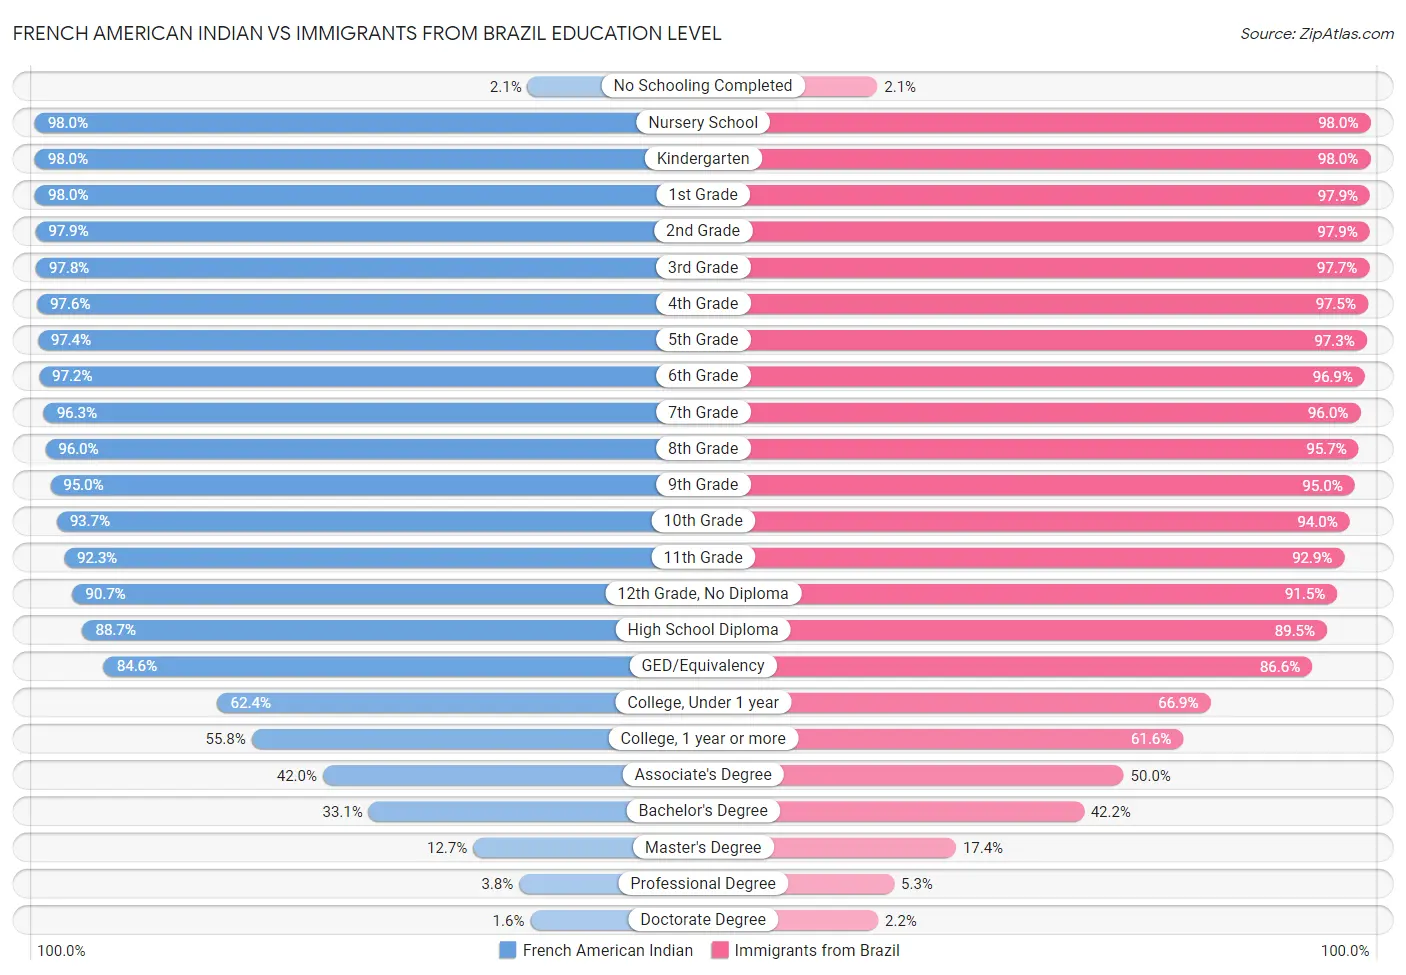 French American Indian vs Immigrants from Brazil Education Level